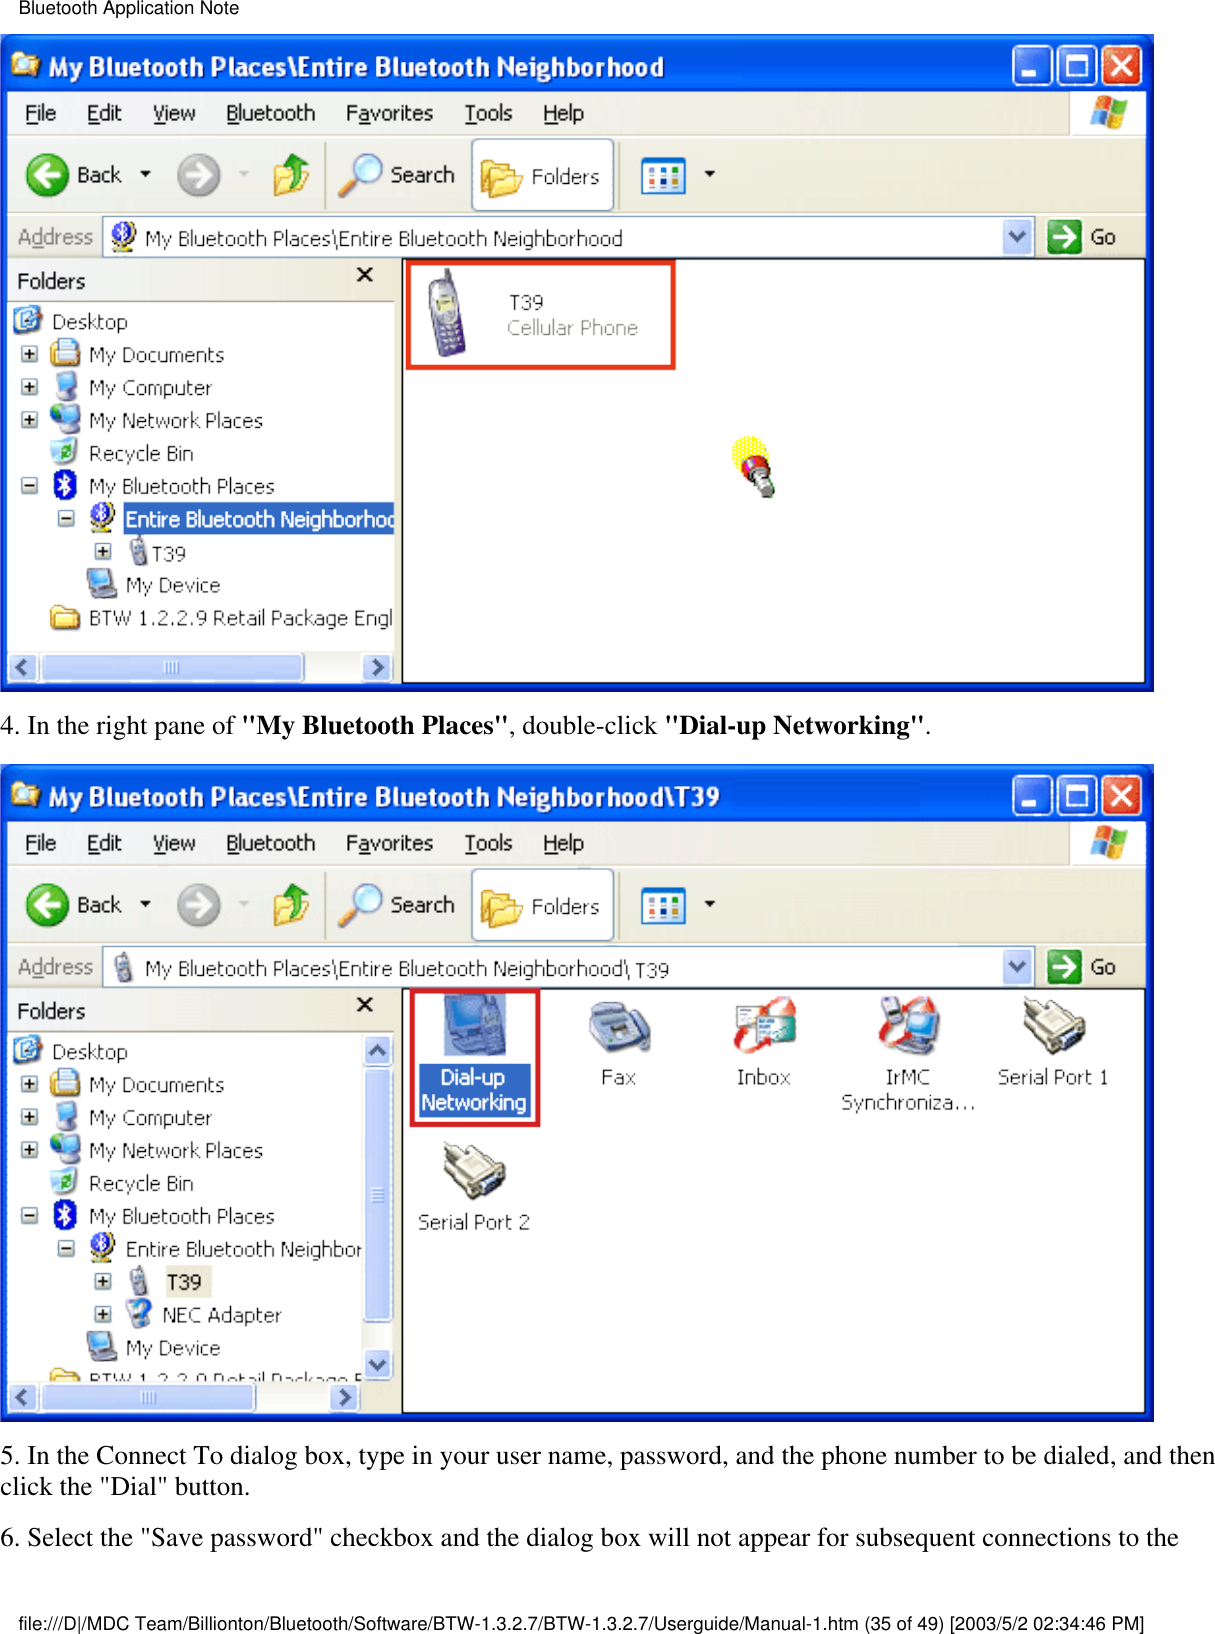 4. In the right pane of &quot;My Bluetooth Places&quot;, double-click &quot;Dial-up Networking&quot;.5. In the Connect To dialog box, type in your user name, password, and the phone number to be dialed, and thenclick the &quot;Dial&quot; button. 6. Select the &quot;Save password&quot; checkbox and the dialog box will not appear for subsequent connections to theBluetooth Application Notefile:///D|/MDC Team/Billionton/Bluetooth/Software/BTW-1.3.2.7/BTW-1.3.2.7/Userguide/Manual-1.htm (35 of 49) [2003/5/2 02:34:46 PM]